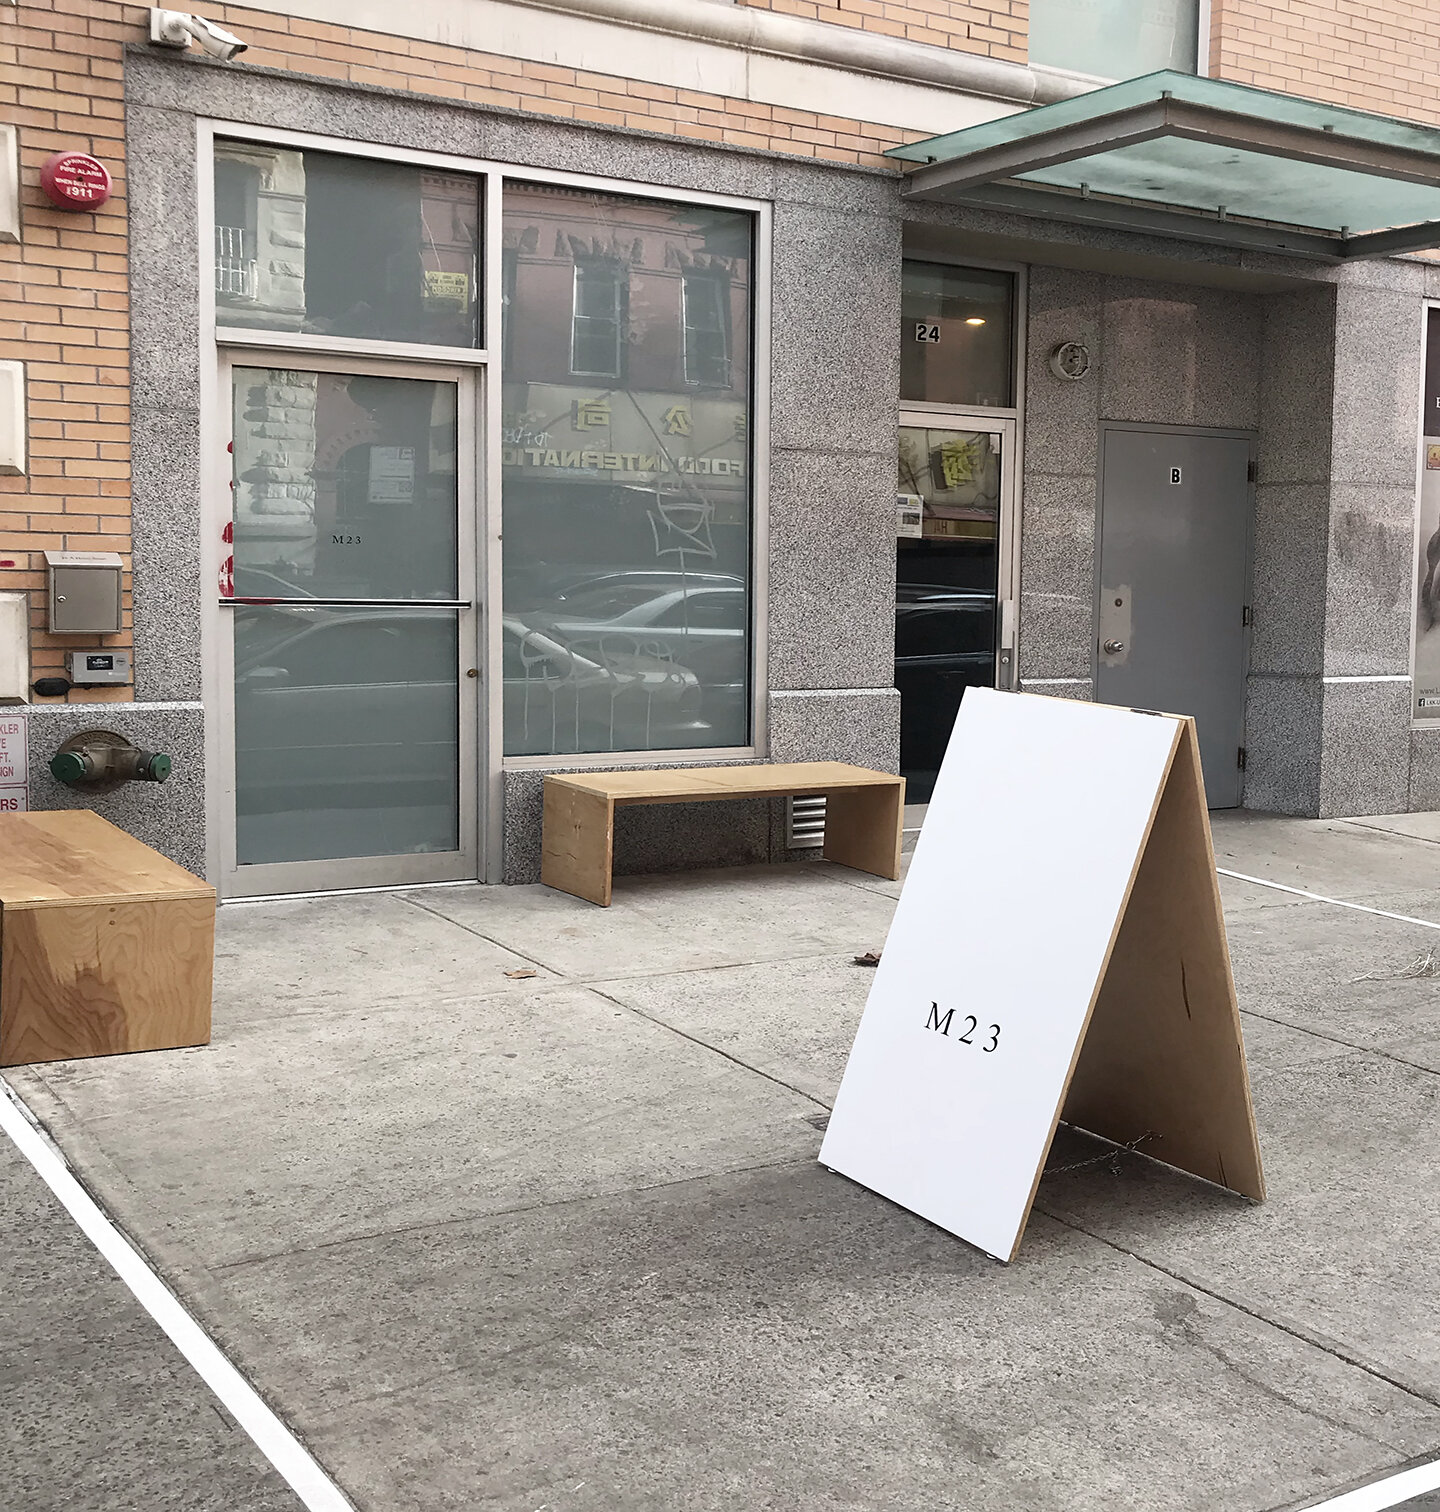  M 2 3 24 Henry Street Designated outdoor gathering area per New York City COVID guidelines 14 March 2021 storefront 